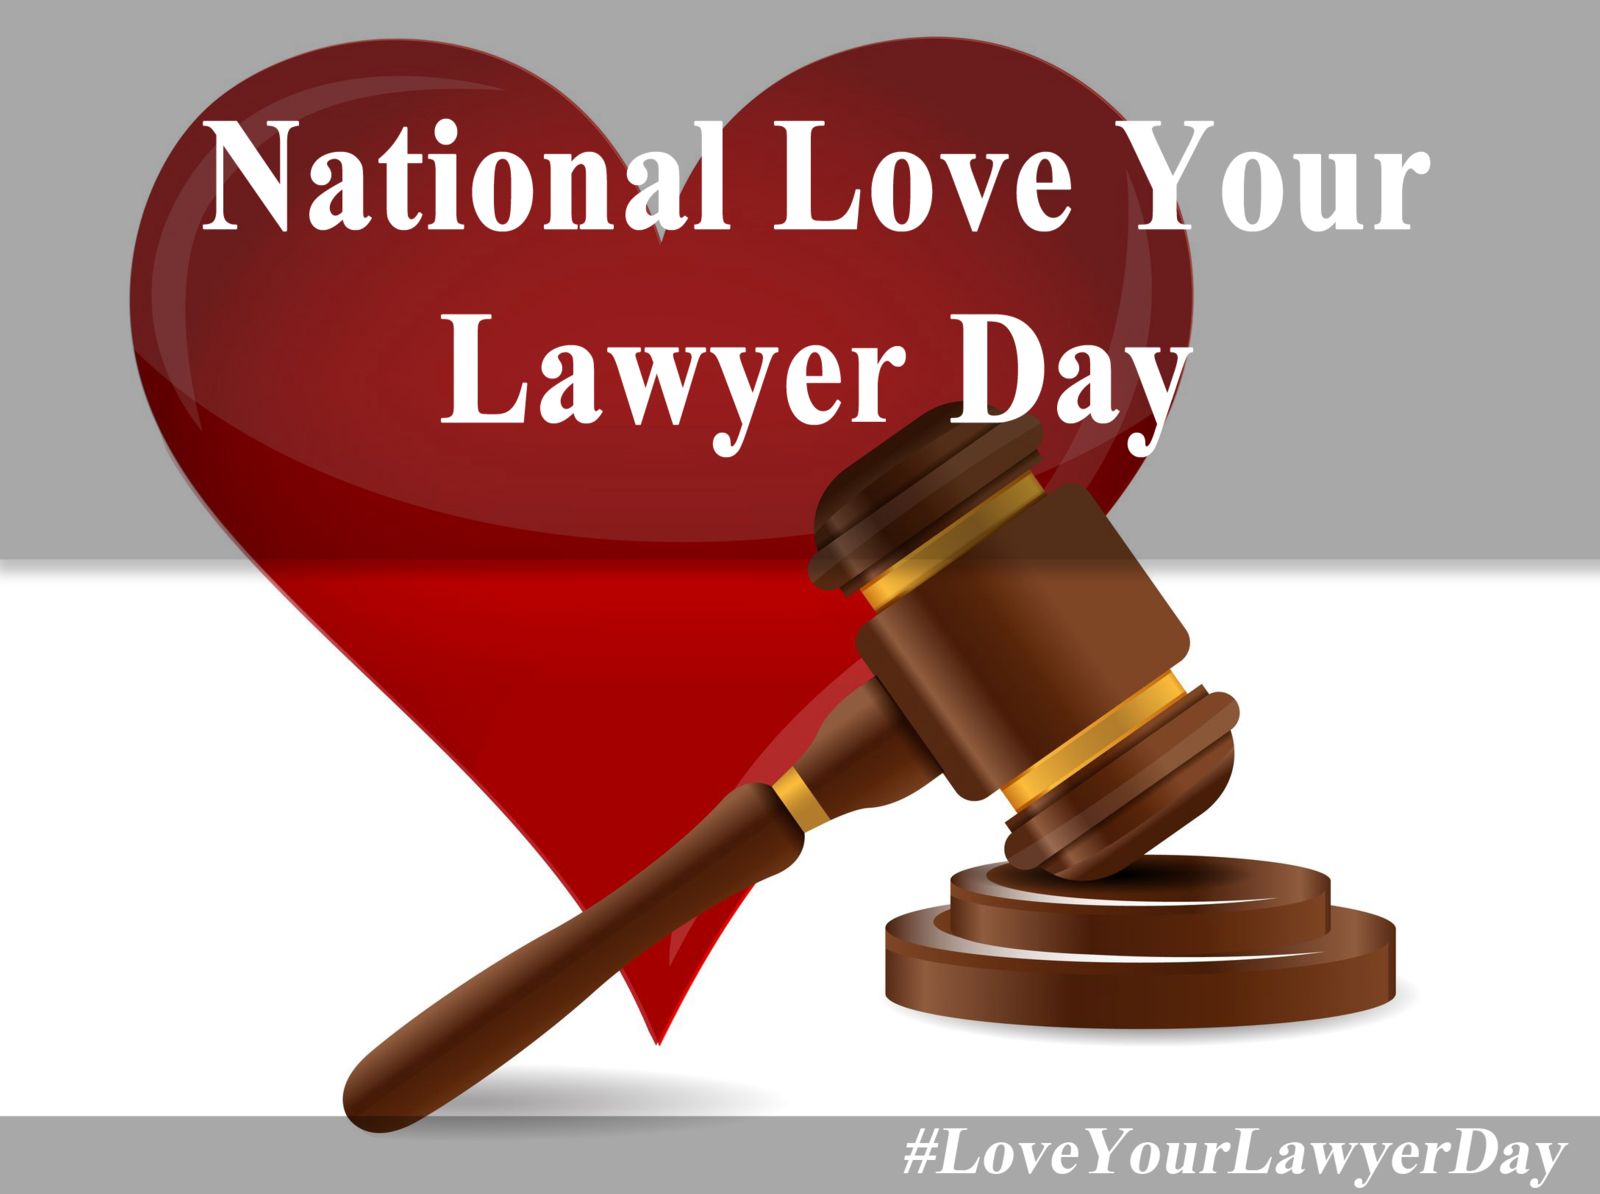 National Love Your Lawyer Day